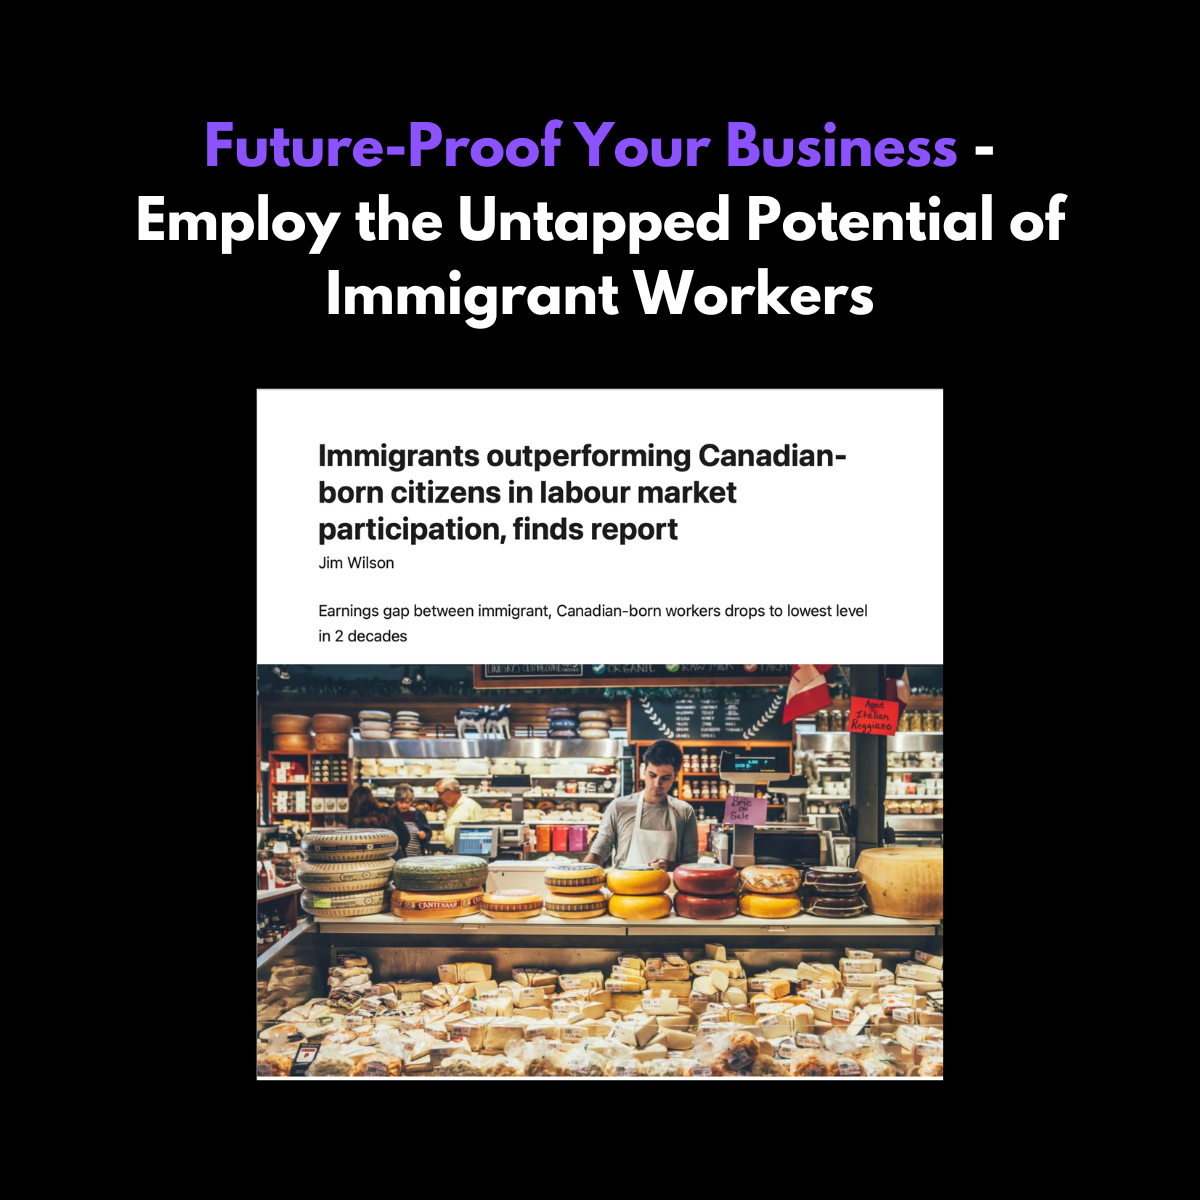 Future-Proof Your Business - Employ the Untapped Potential of Immigrant Workers